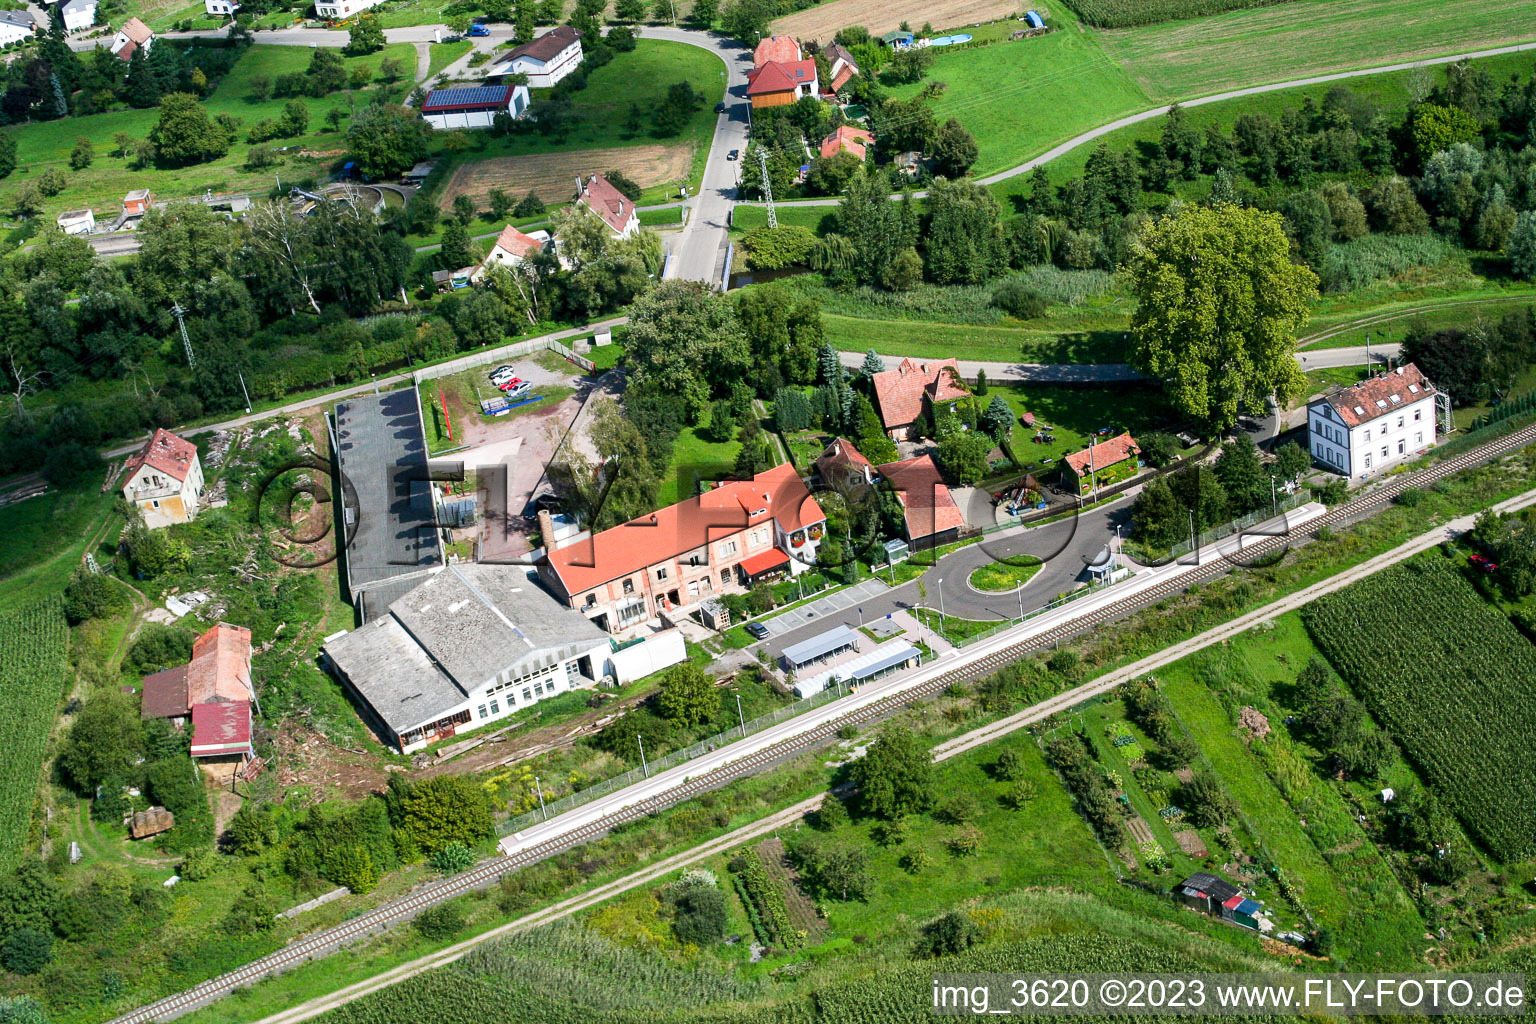 Aerial view of Railroad station in Berg in the state Rhineland-Palatinate, Germany